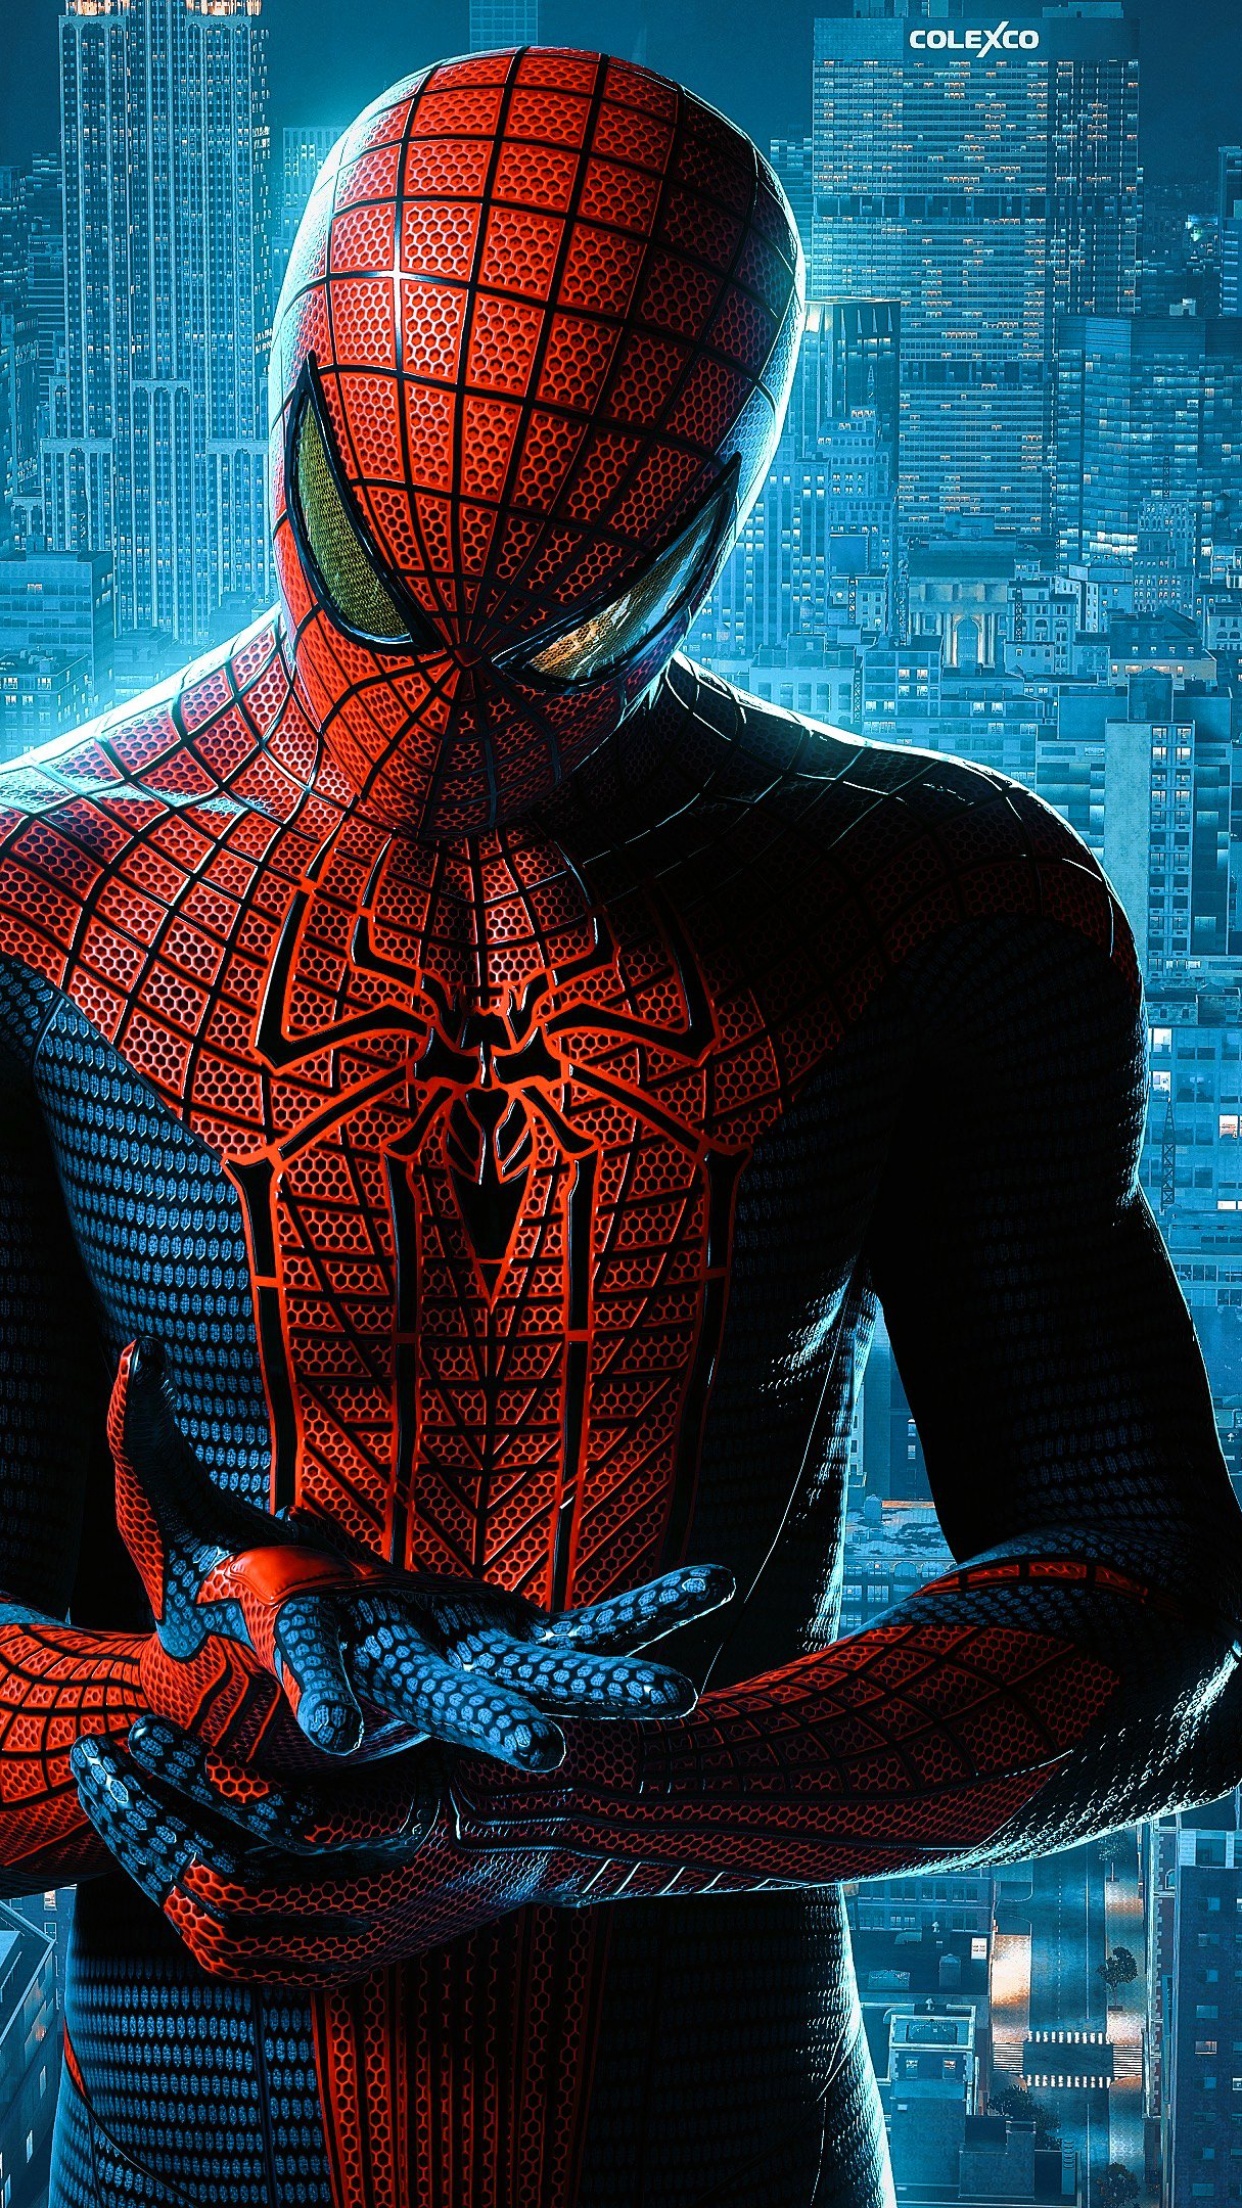 Spiderman Artwork Iphone X Spiderman Artwork Iphone X is an HD desktop  wallpaper posted in our free i  Spiderman artwork Spiderman wallpaper  Marvel wallpaper